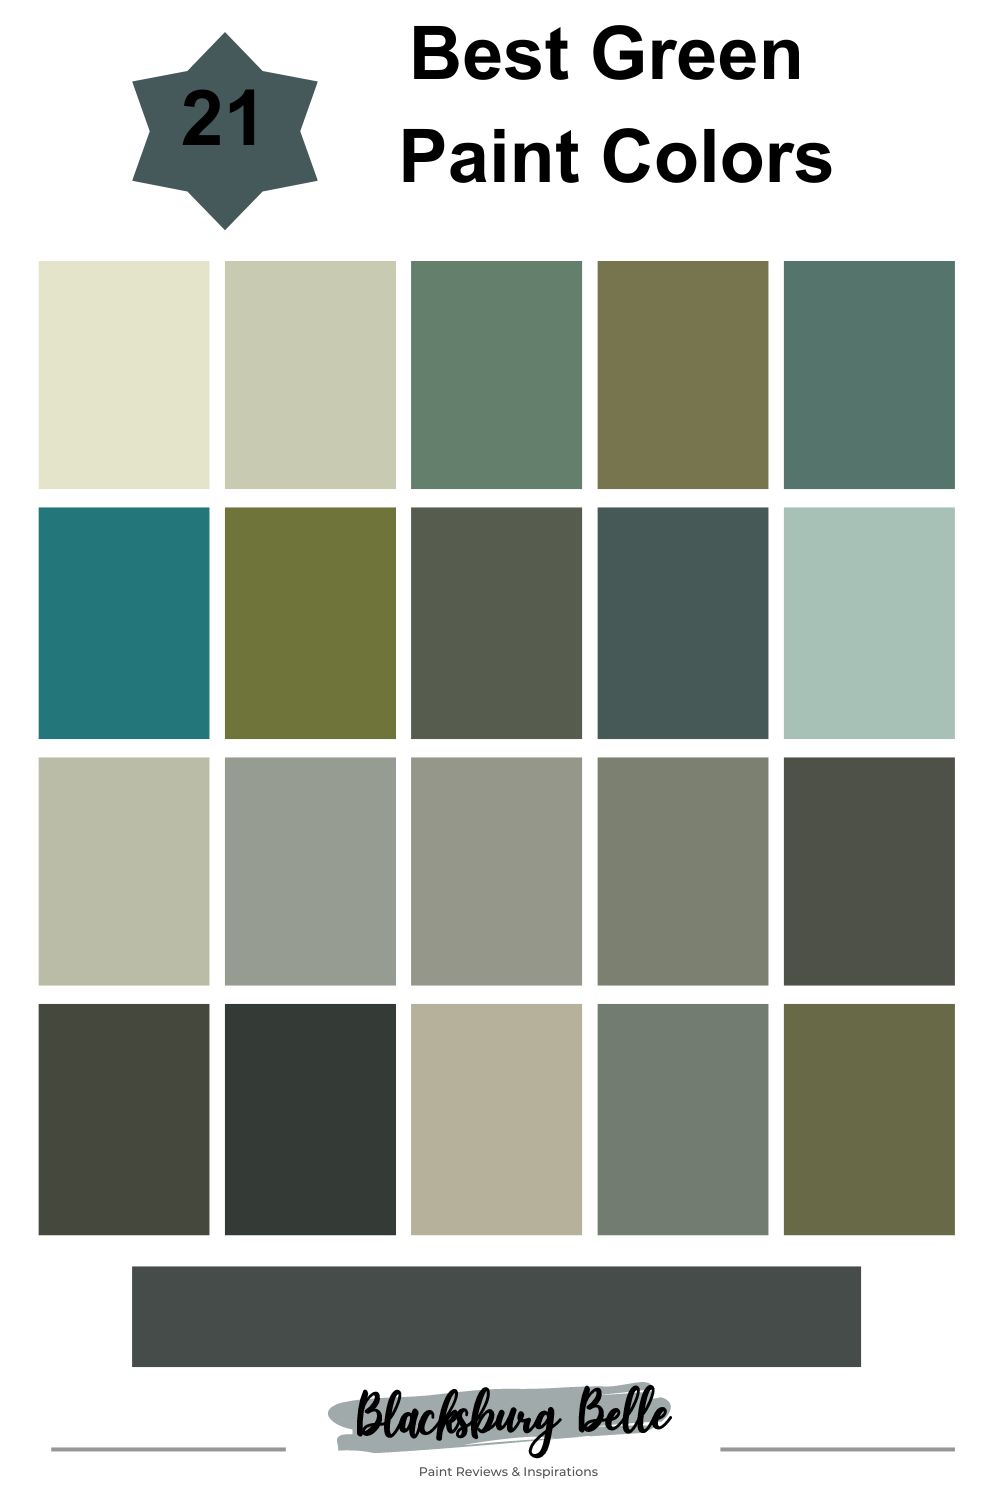 21 Best Green Paint Colors From Light to Dark Green